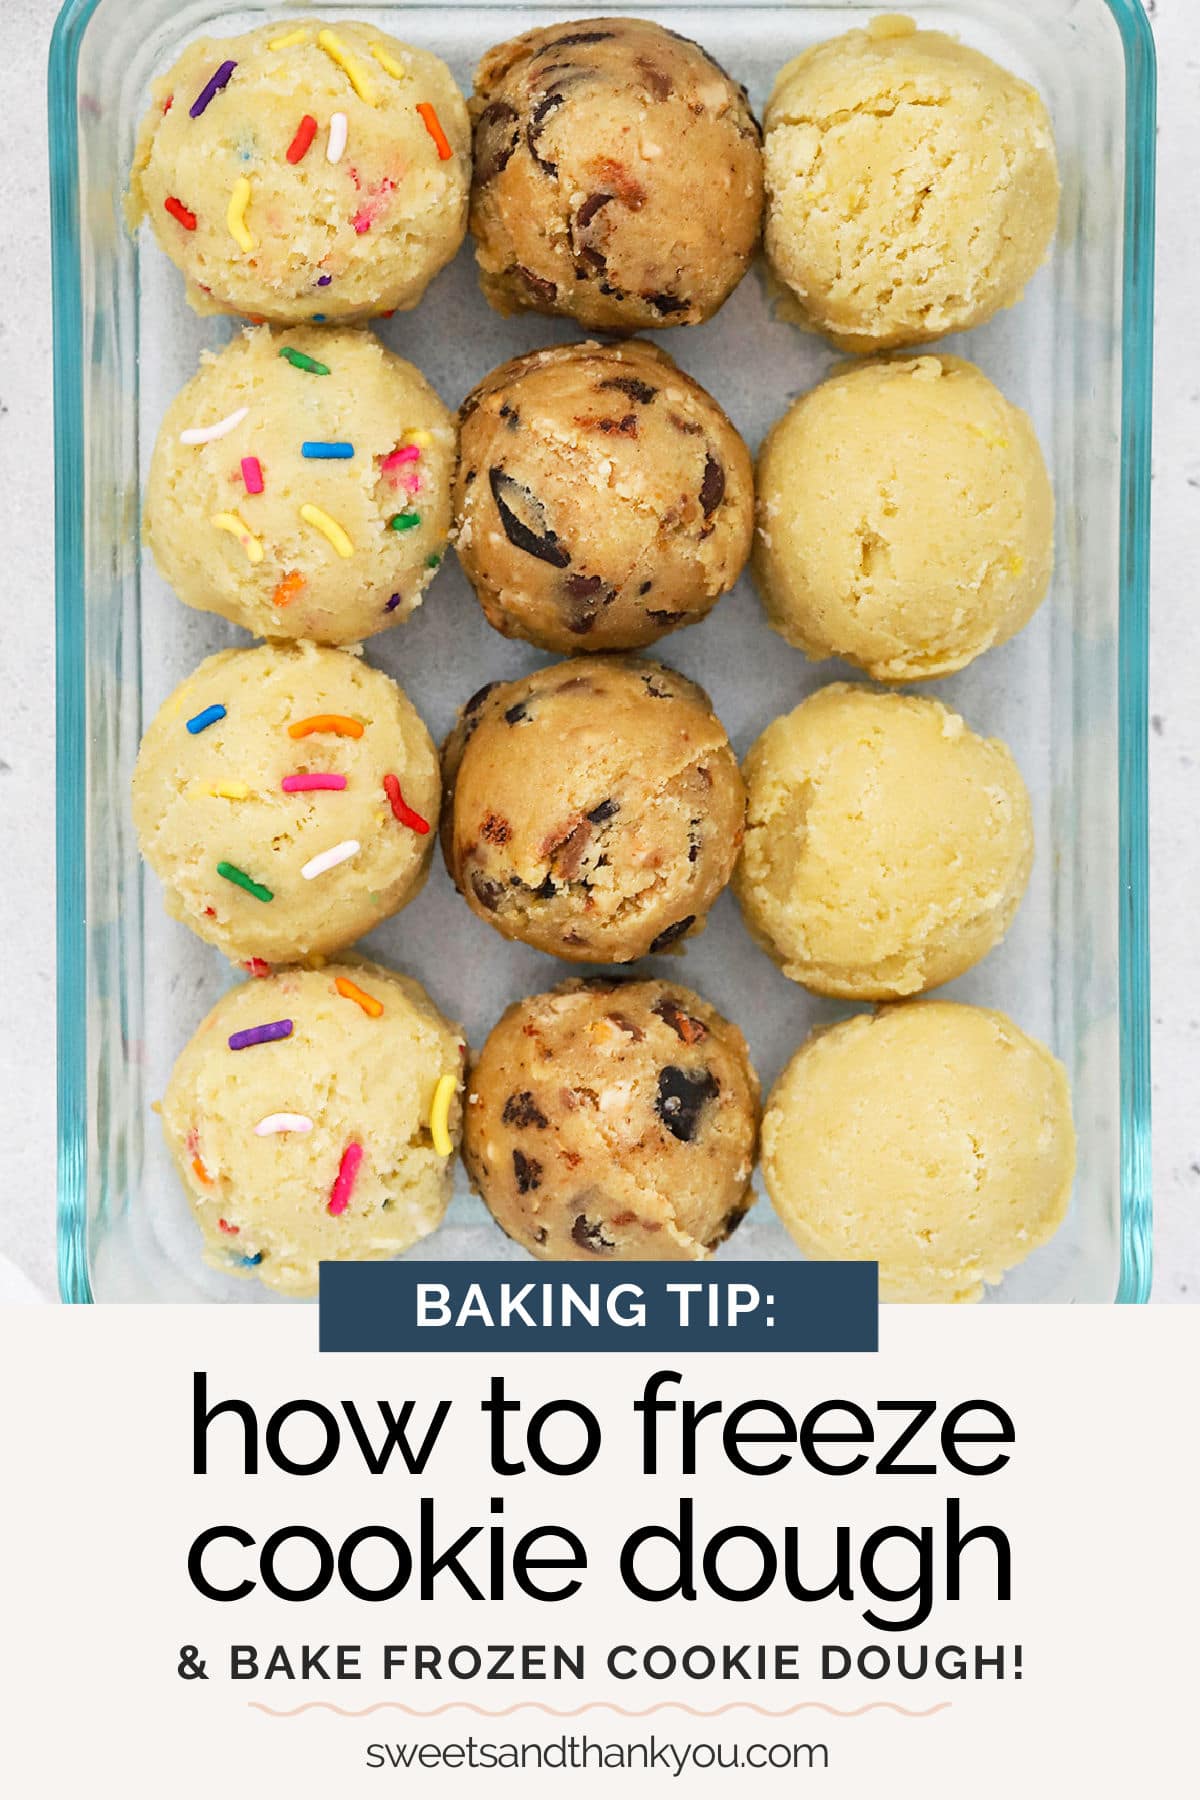 How To Freeze Cookie Dough - All the tips, tricks, and techniques you need to freeze cookie dough and how to bake frozen cookie dough when you need it. Now you can always have cookies on hand! // How to freeze cookies // how to bake frozen cookie dough // baking tips // gluten free cookie dough // gluten free freezer recipes // how to bake cookie dough from frozen 